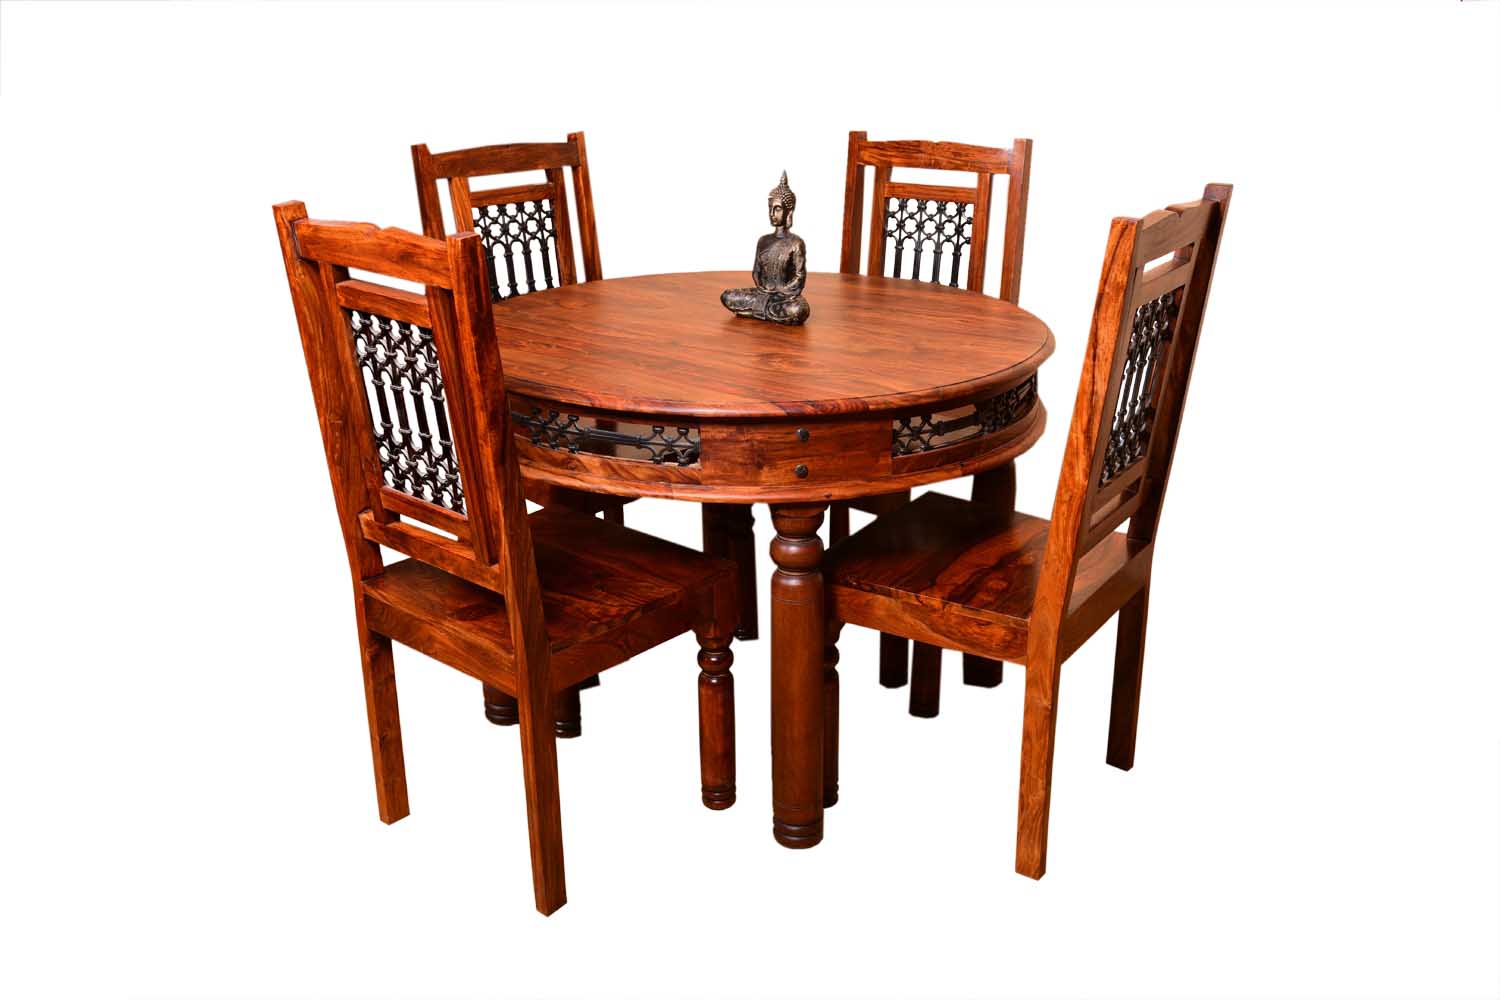 4 seater dining room set